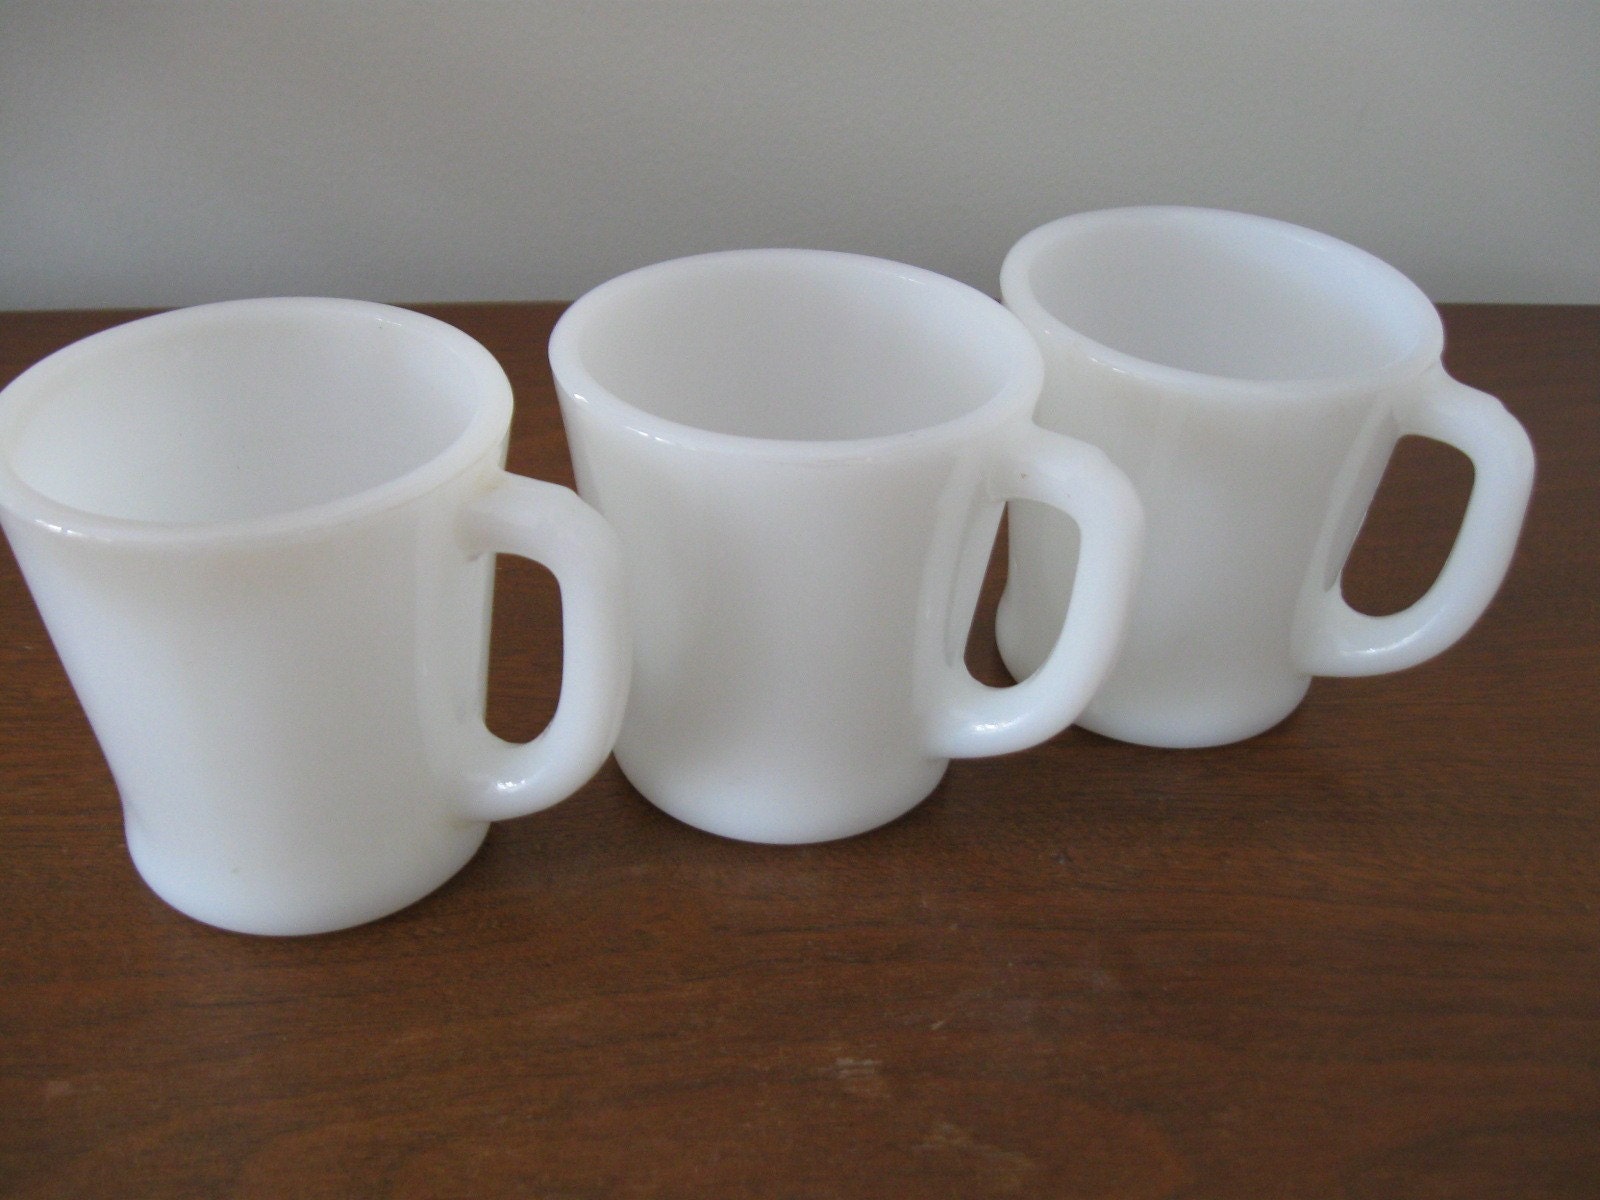 Coffee white by Petuniapie Mug Set Cups White King cups of vintage  Fire Vintage 1950s